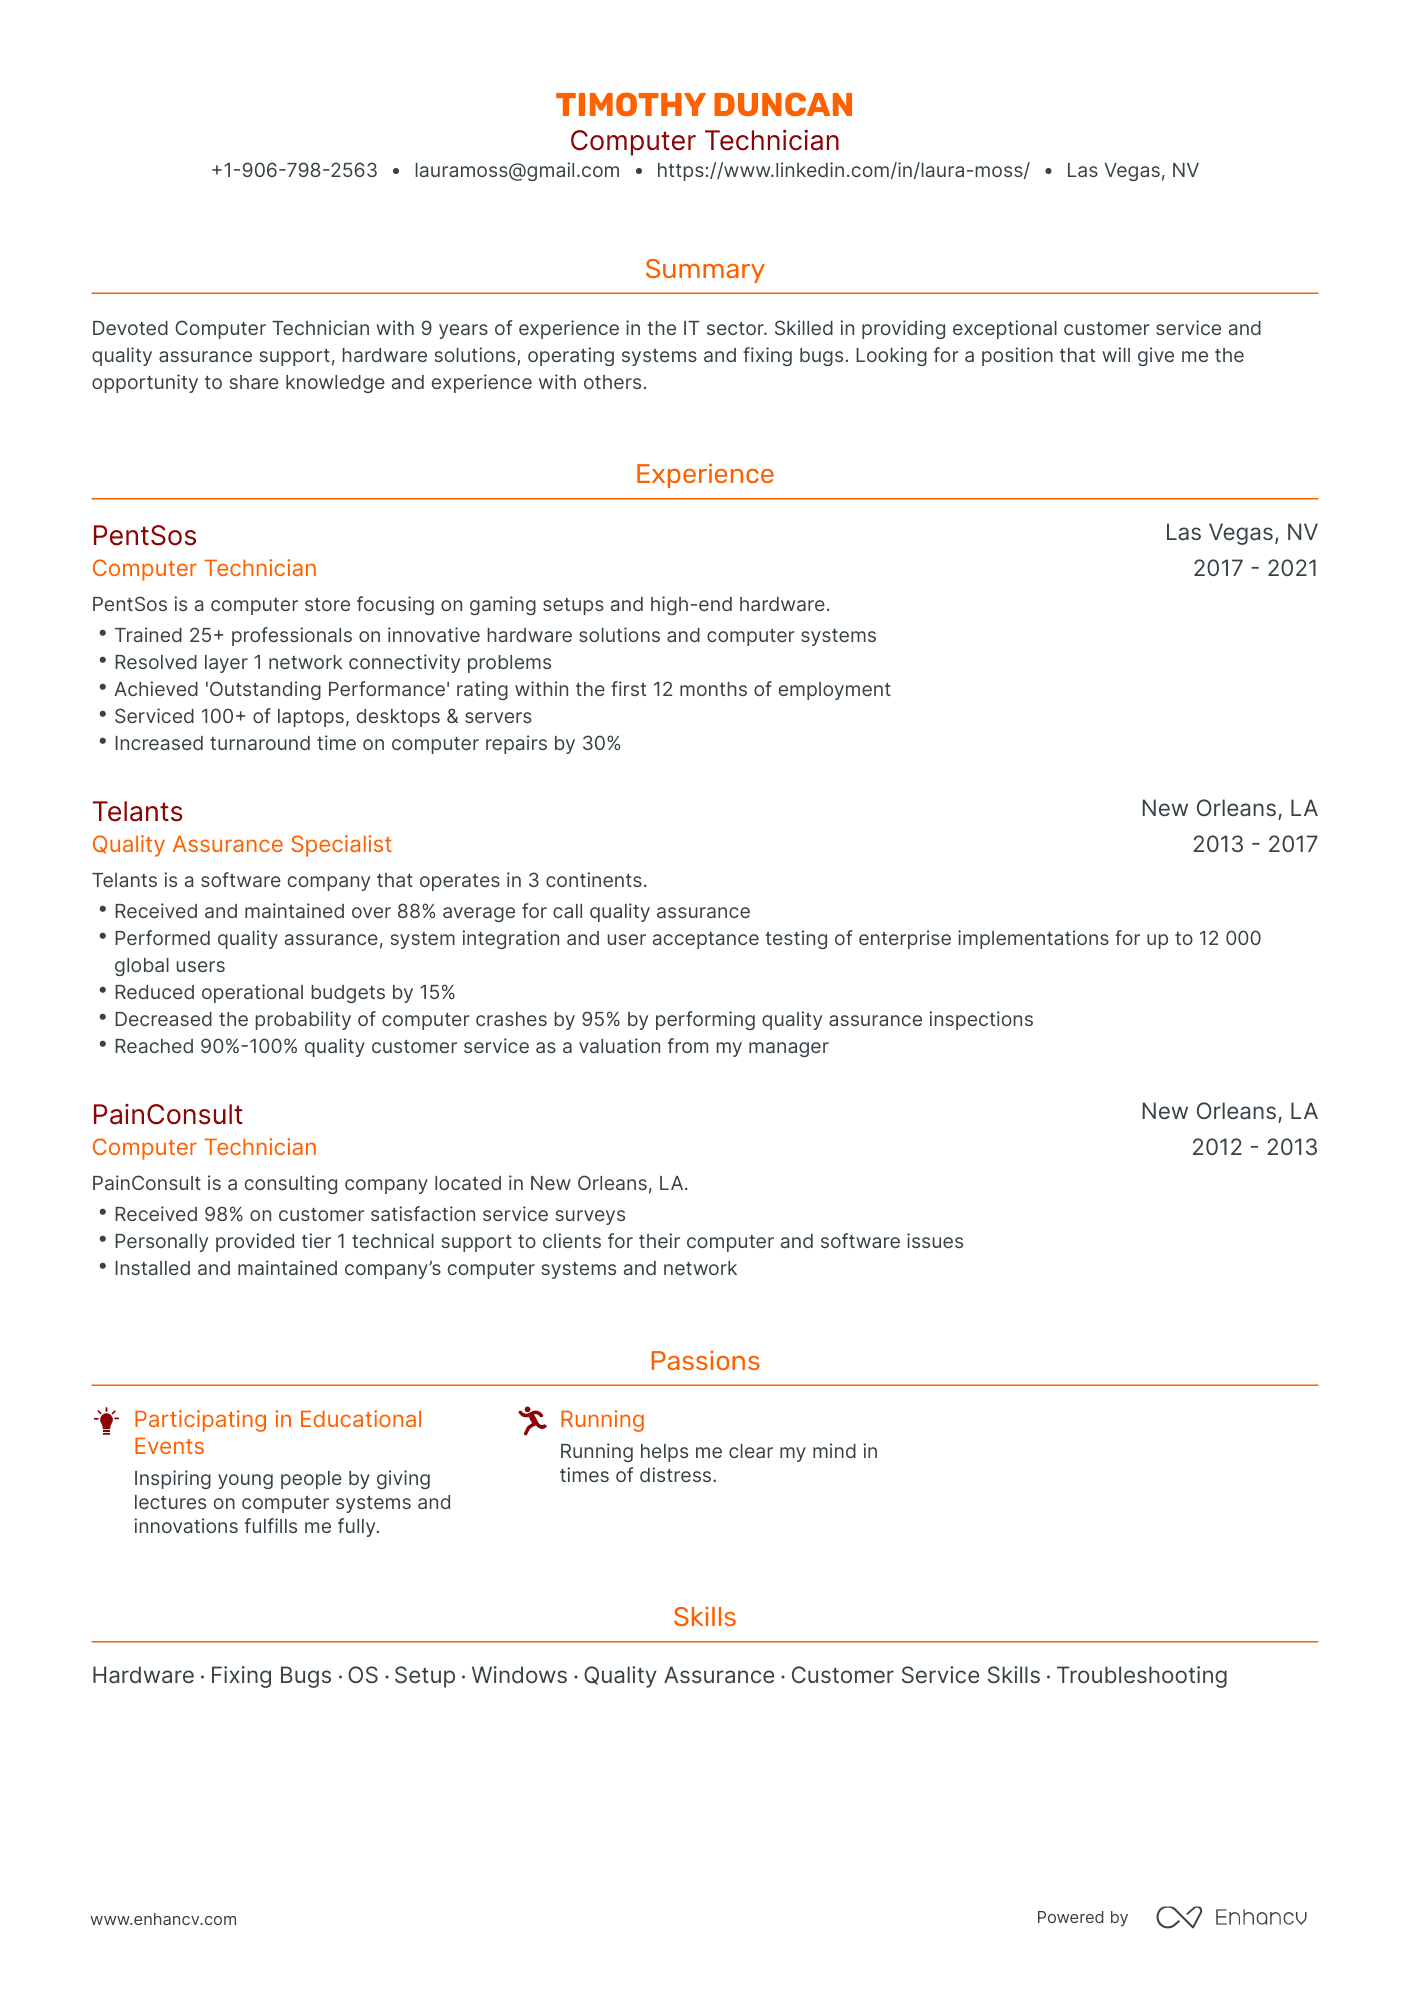 Traditional Computer Technician Resume Template